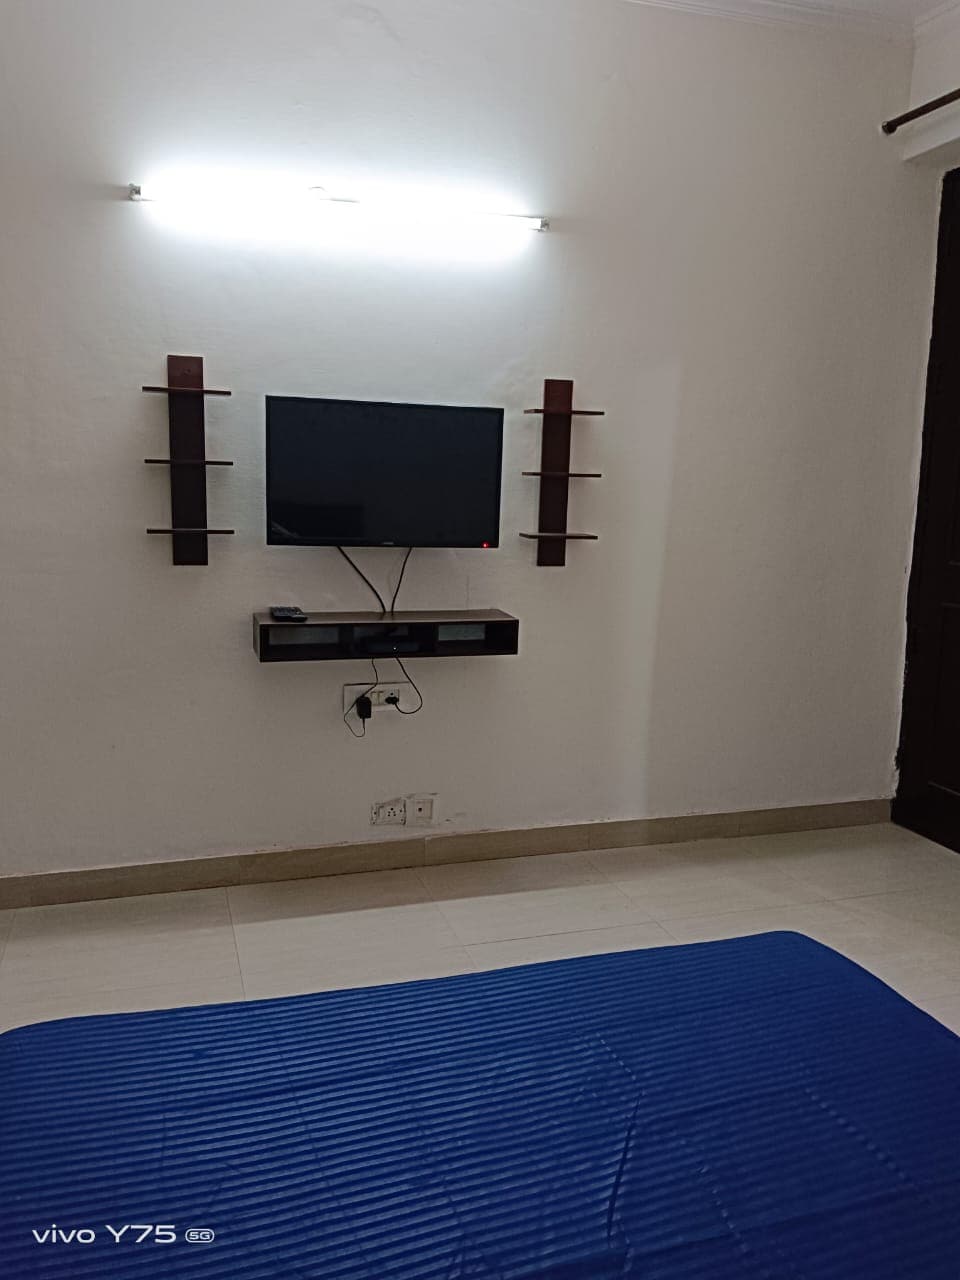 Sector 51: 1 Room Set of 3BHK Flat(03)